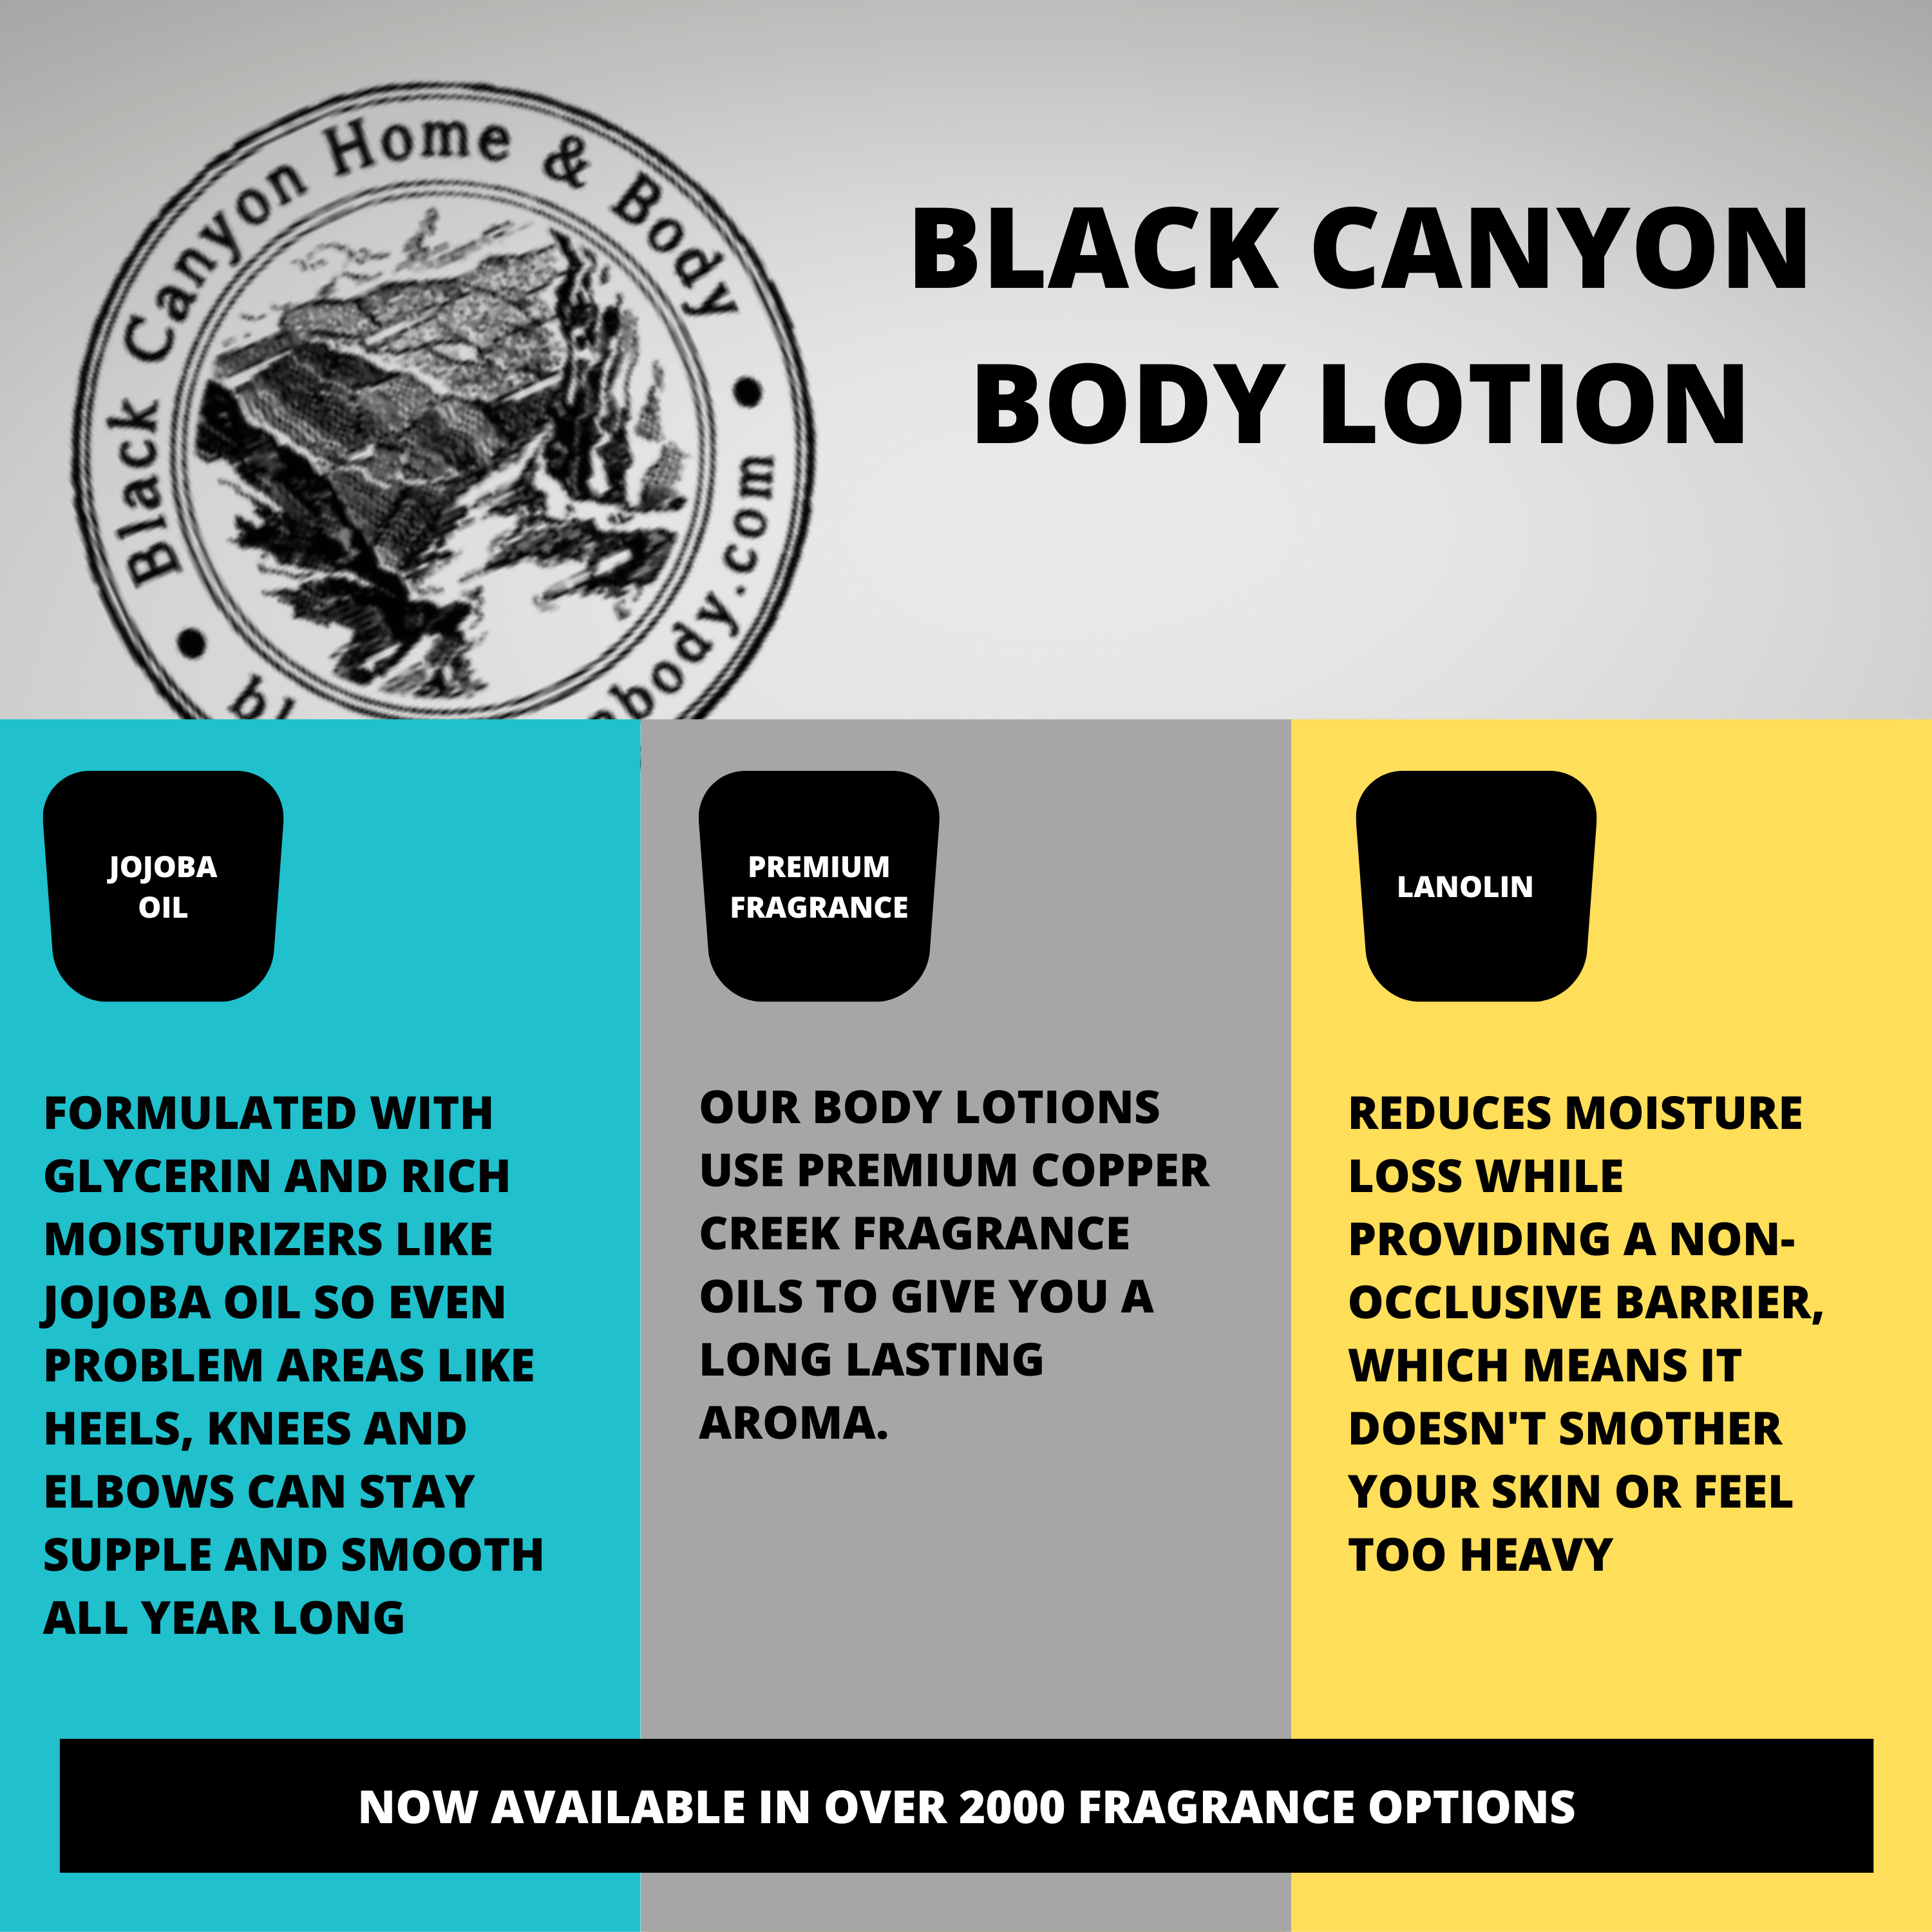 Black Canyon Black Currant Tea Scented Luxury Body Lotion with Lanolin and Jojoba Oil